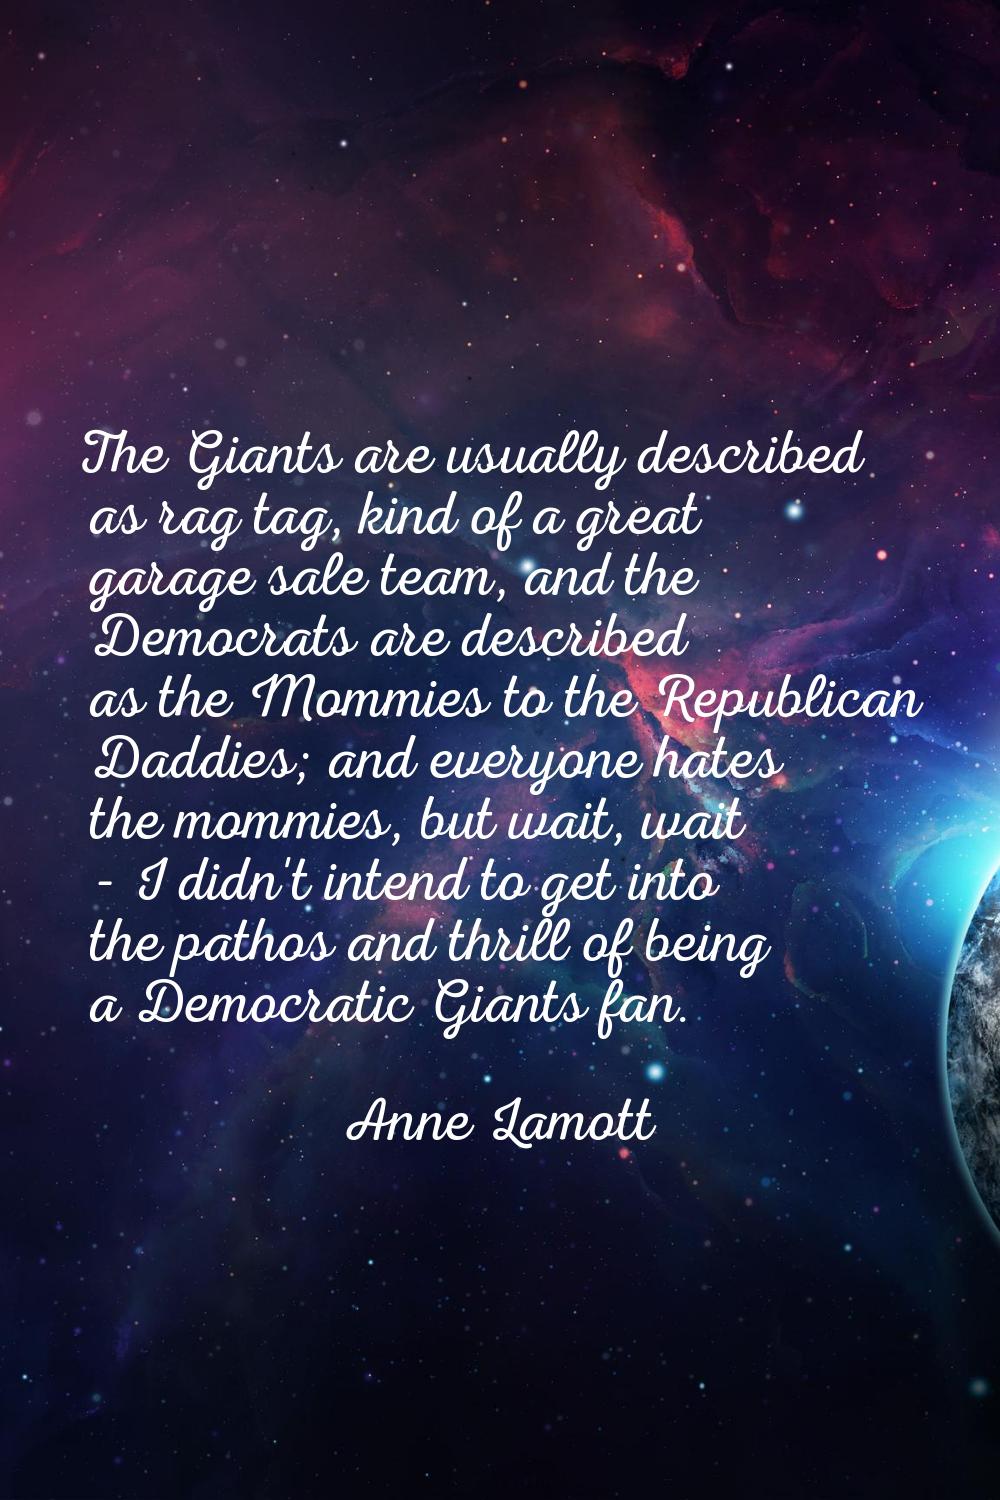 The Giants are usually described as rag tag, kind of a great garage sale team, and the Democrats ar